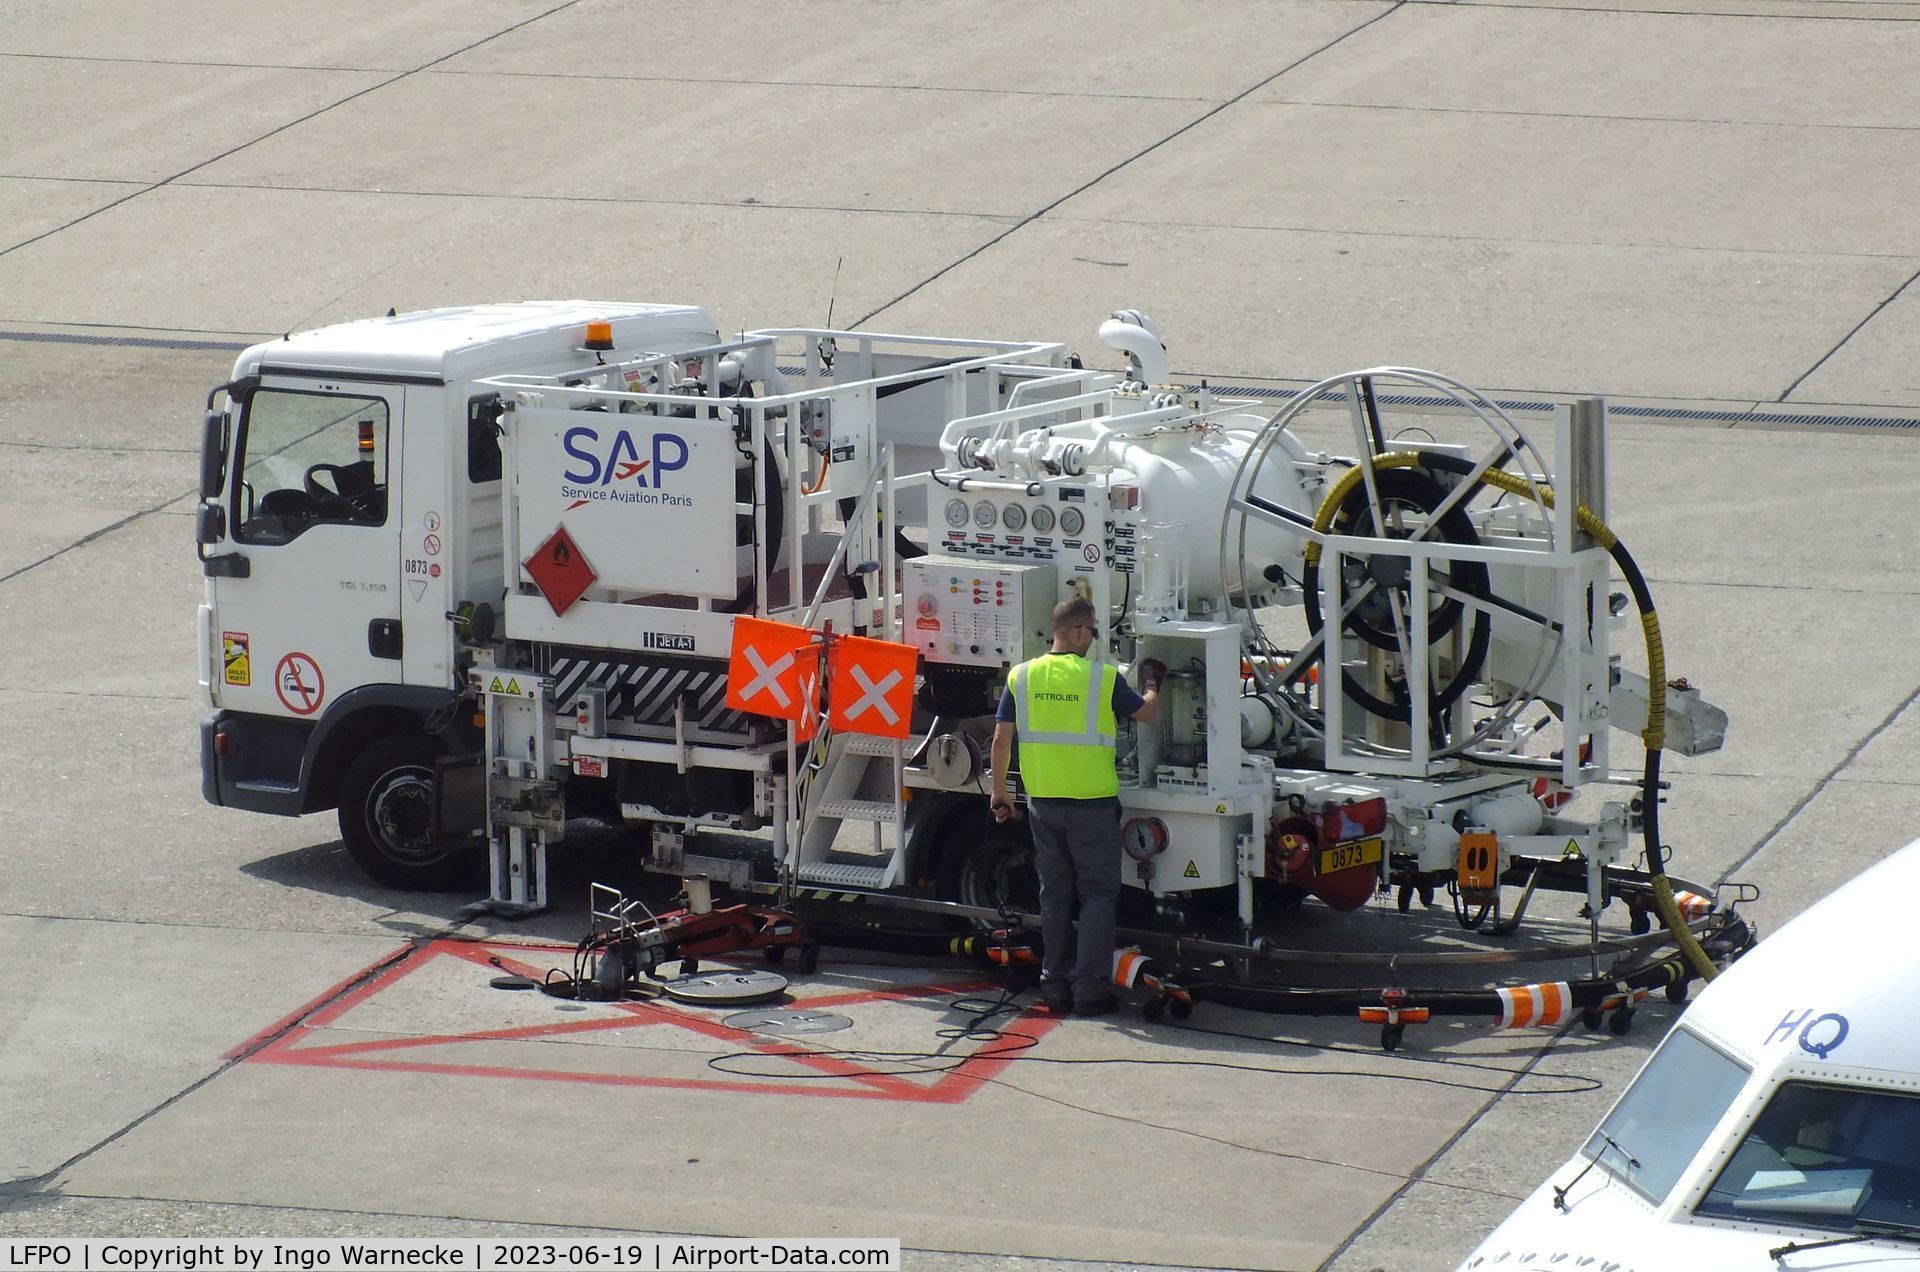 Paris Orly Airport, Orly (near Paris) France (LFPO) - hydrant refuelling truck at Paris/Orly airport